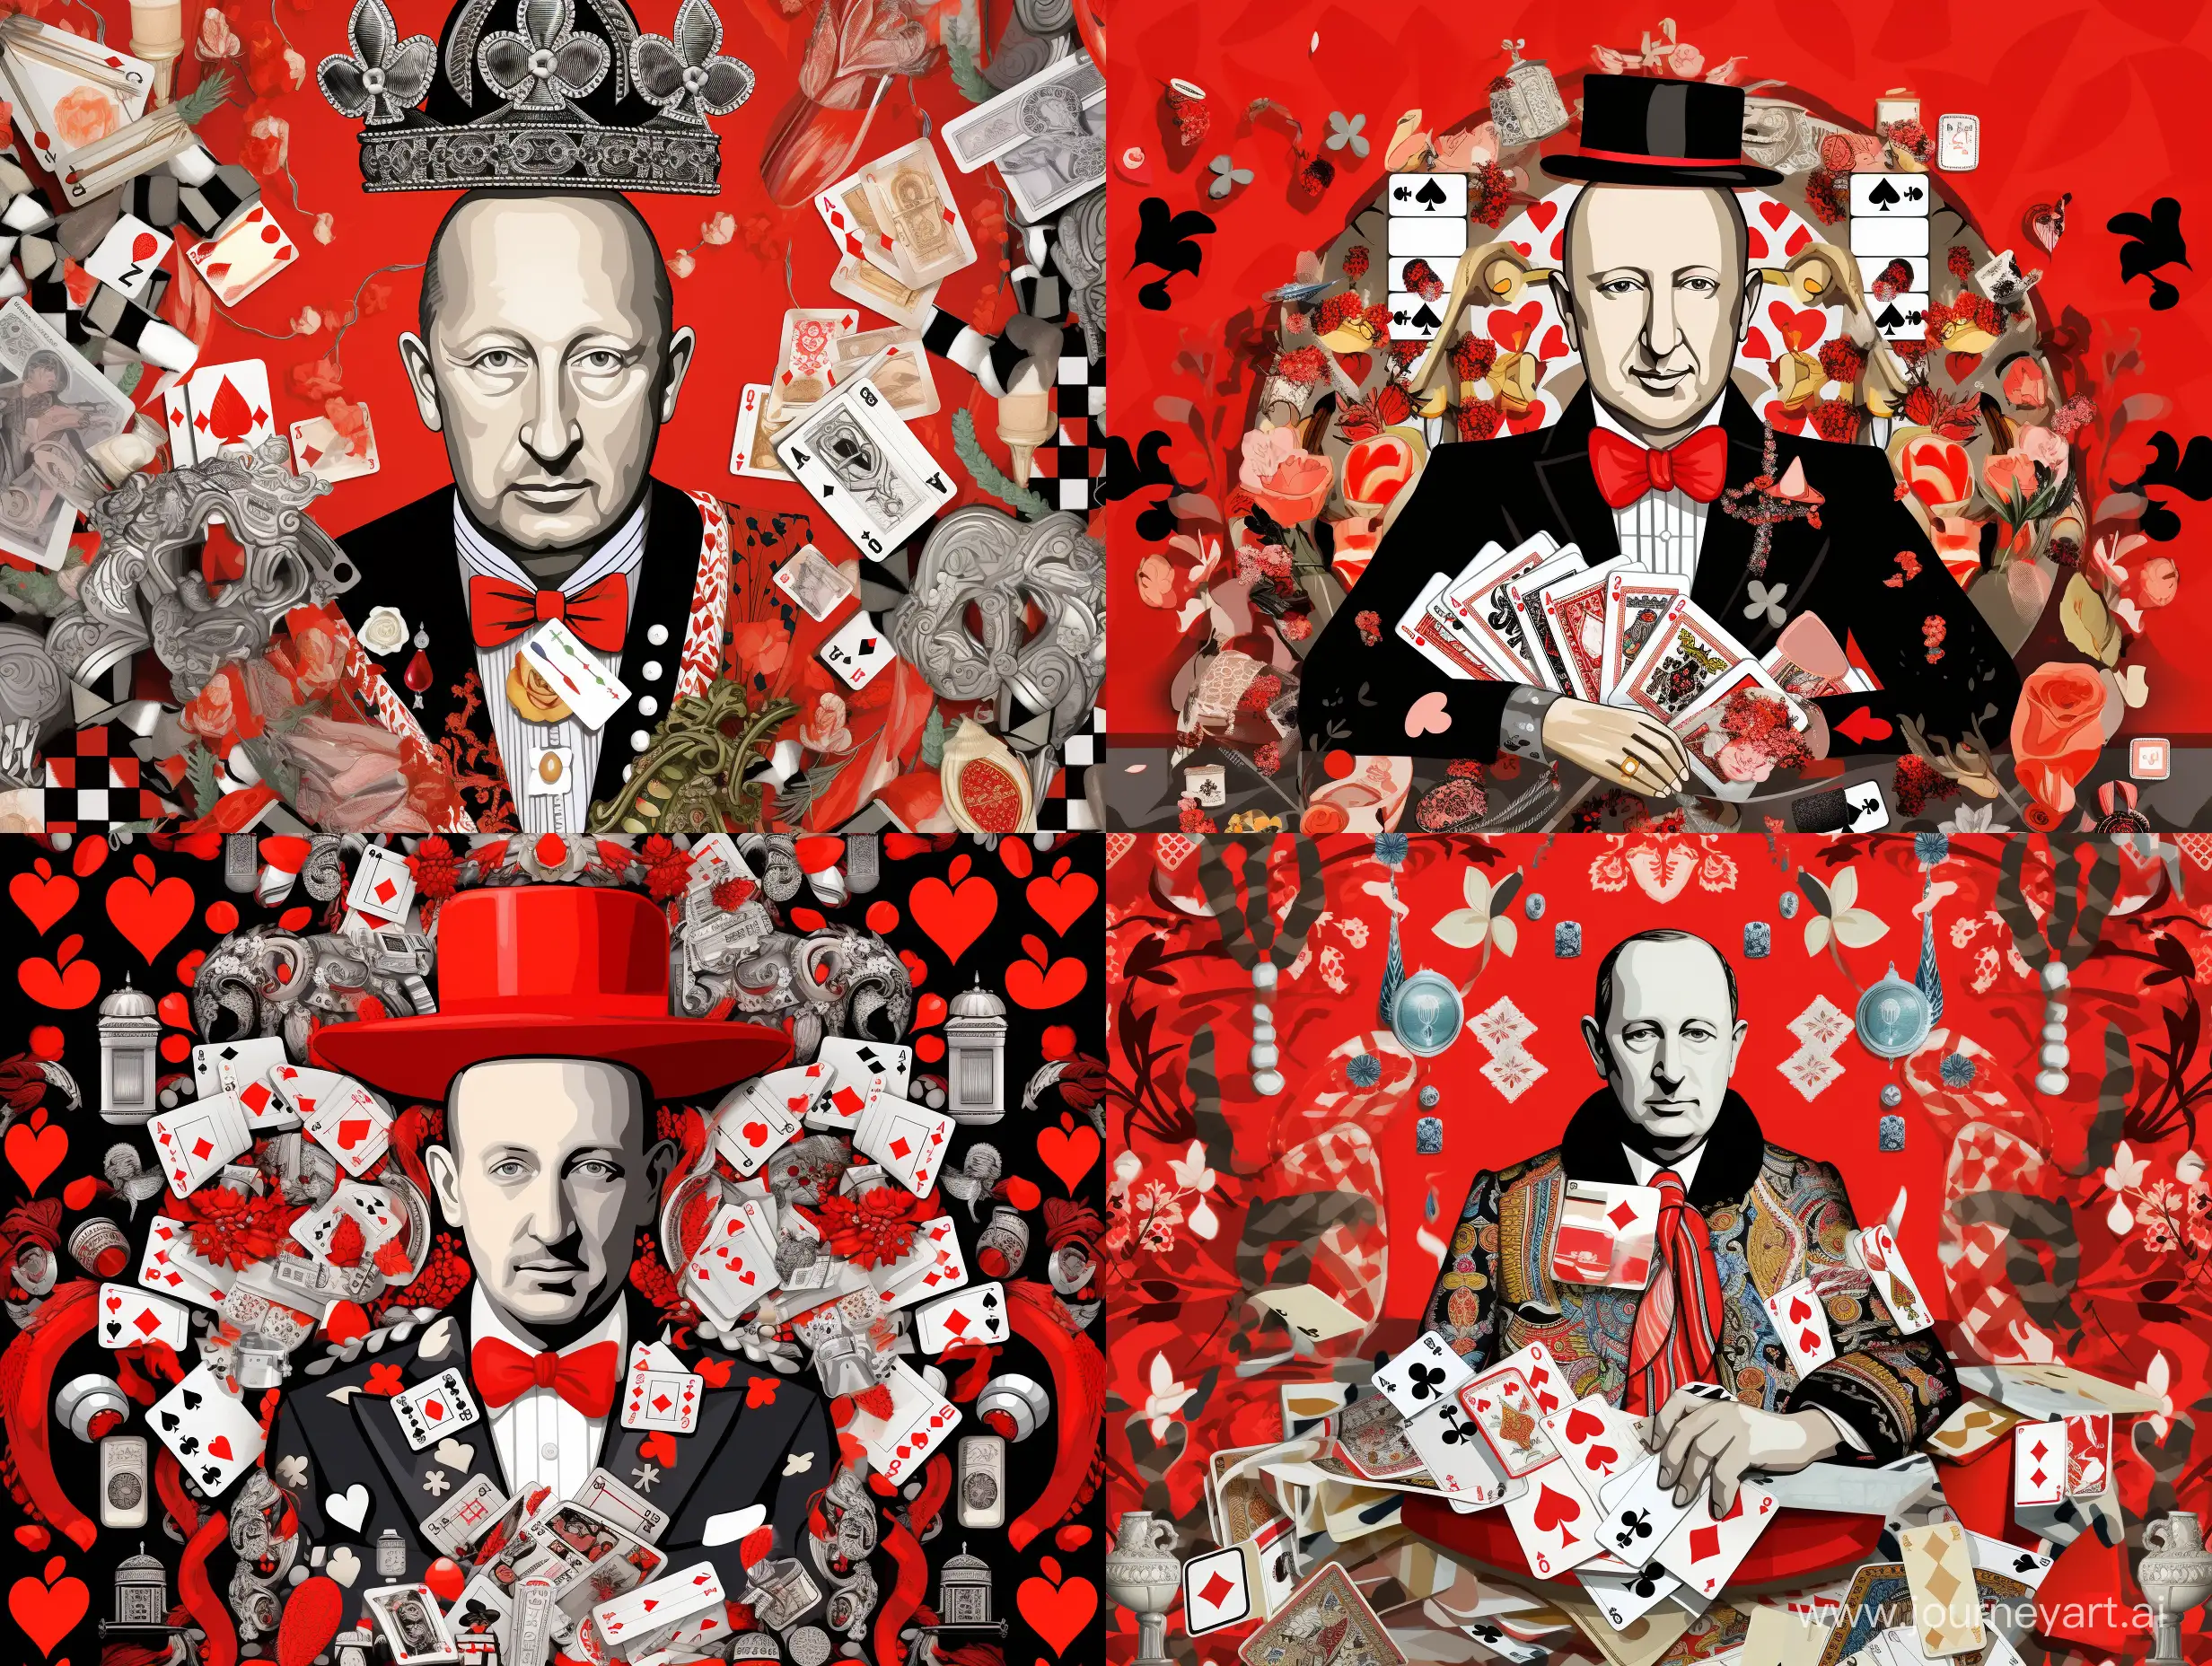 Portrait of Christian Dior, with accessories from Dior, with a small crown on his head, many details, complicated, on the background of a pattern of clubs, colors black, white, red, gray, caricature, pop art style, fashion illustration style